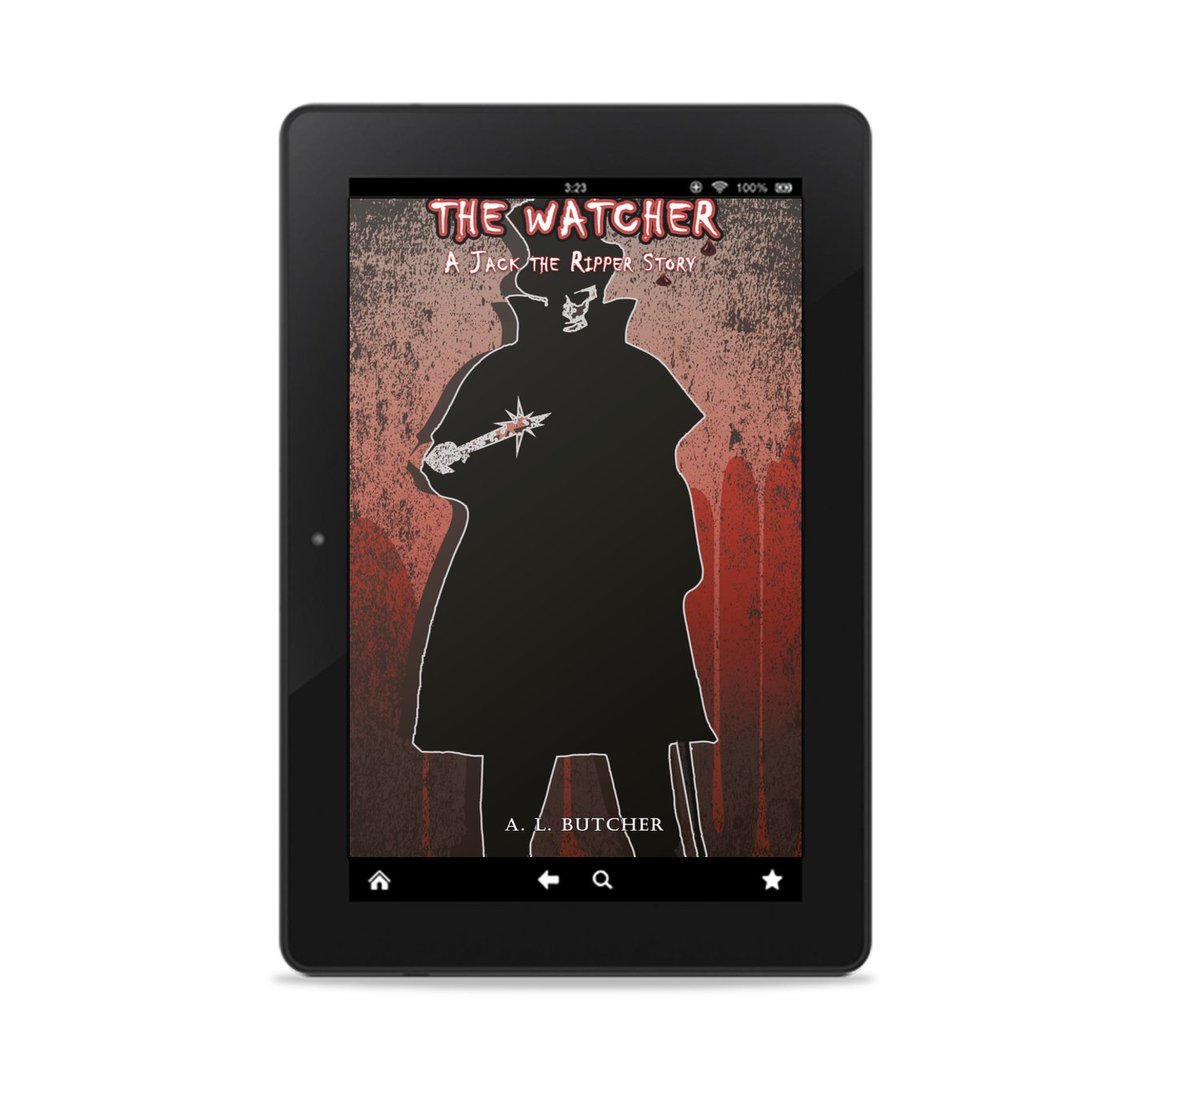 A mysterious killer is stalking women of the streets - his true name is unknown, but his legend will go down in history. This is a short tale of #JacktheRipper.
18 rated for scenes of violence.
#Horror #historicalfiction #IARTG #ASMSG
books2read.com/TheWatcherJTR